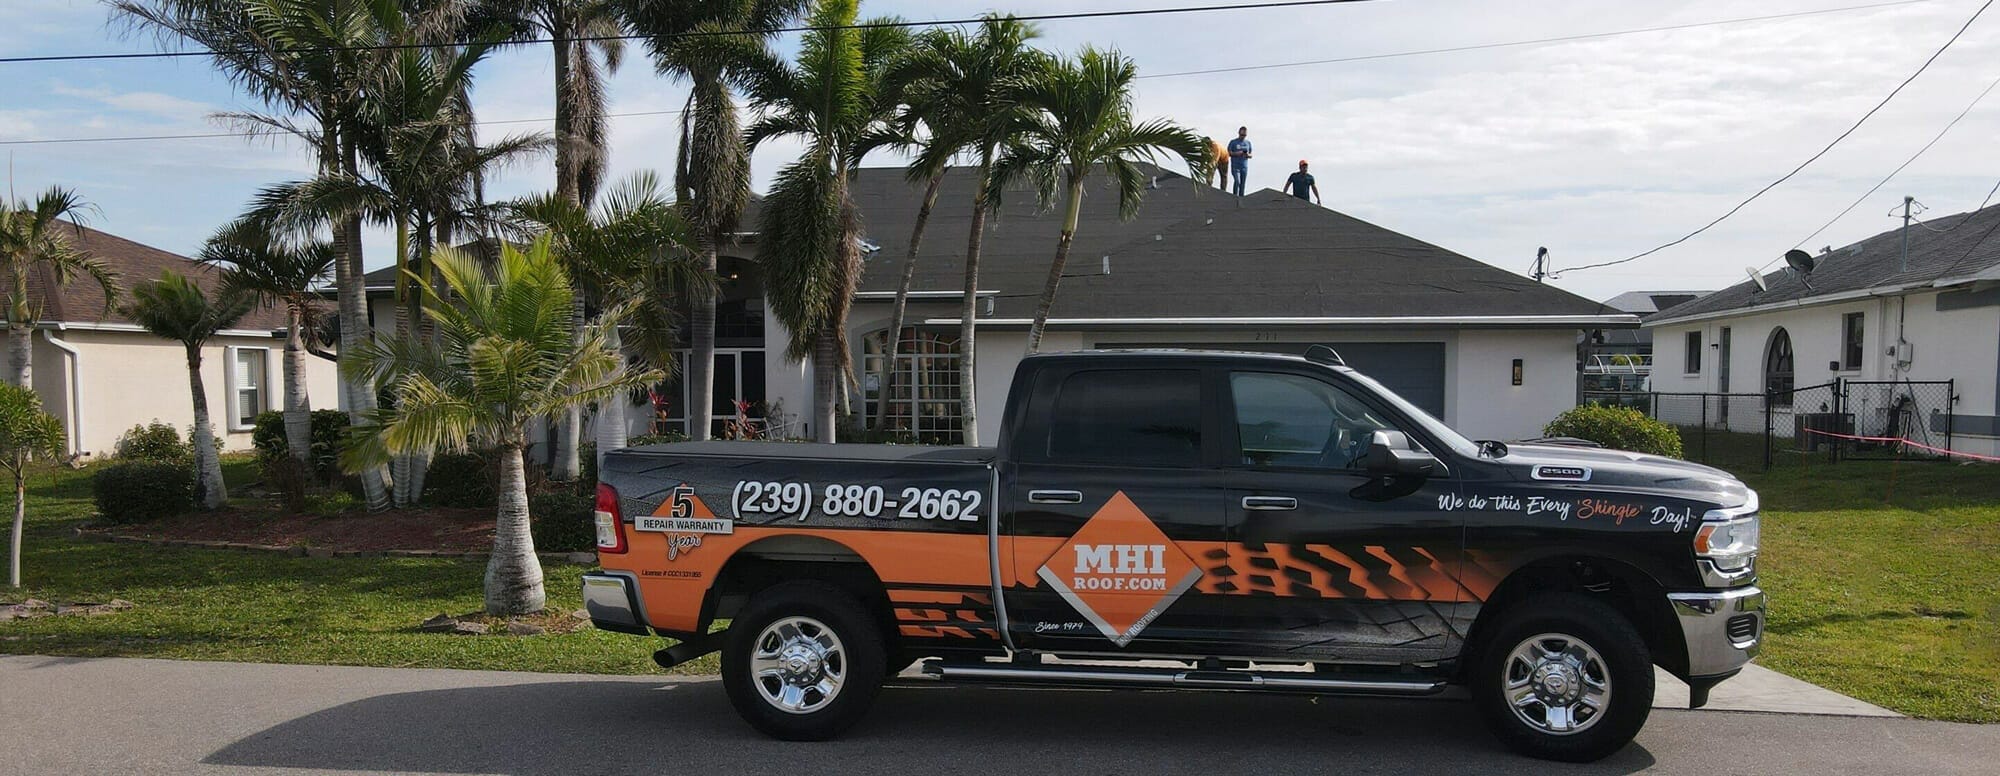 Trusted Cape Coral Roofing Company | MHI Roofing